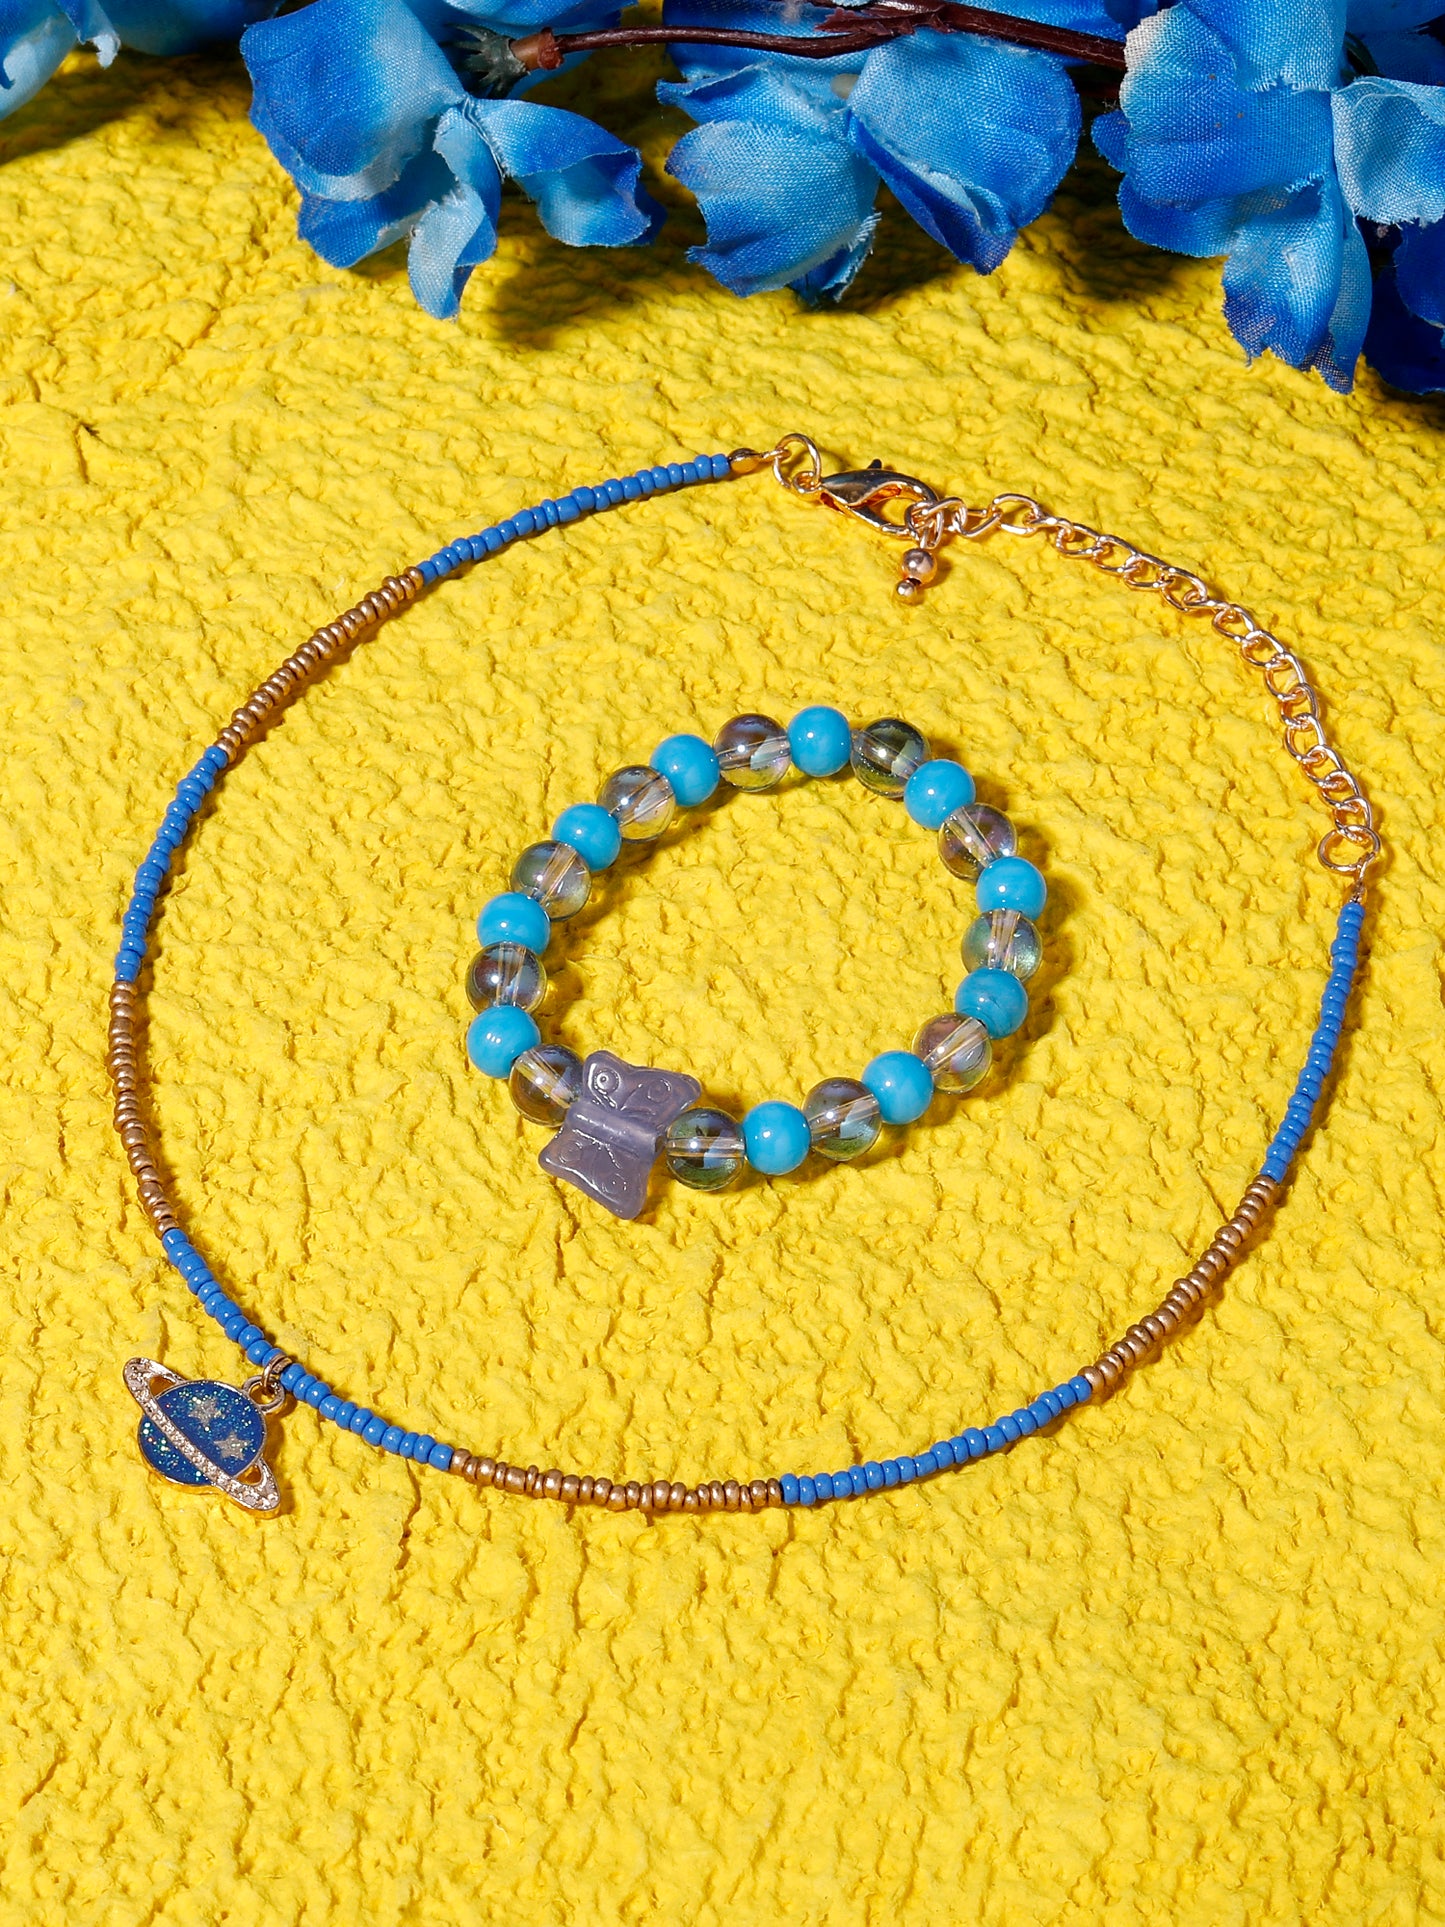 Blueberry KIDS blue and gold pendant necklace and bracelet combo